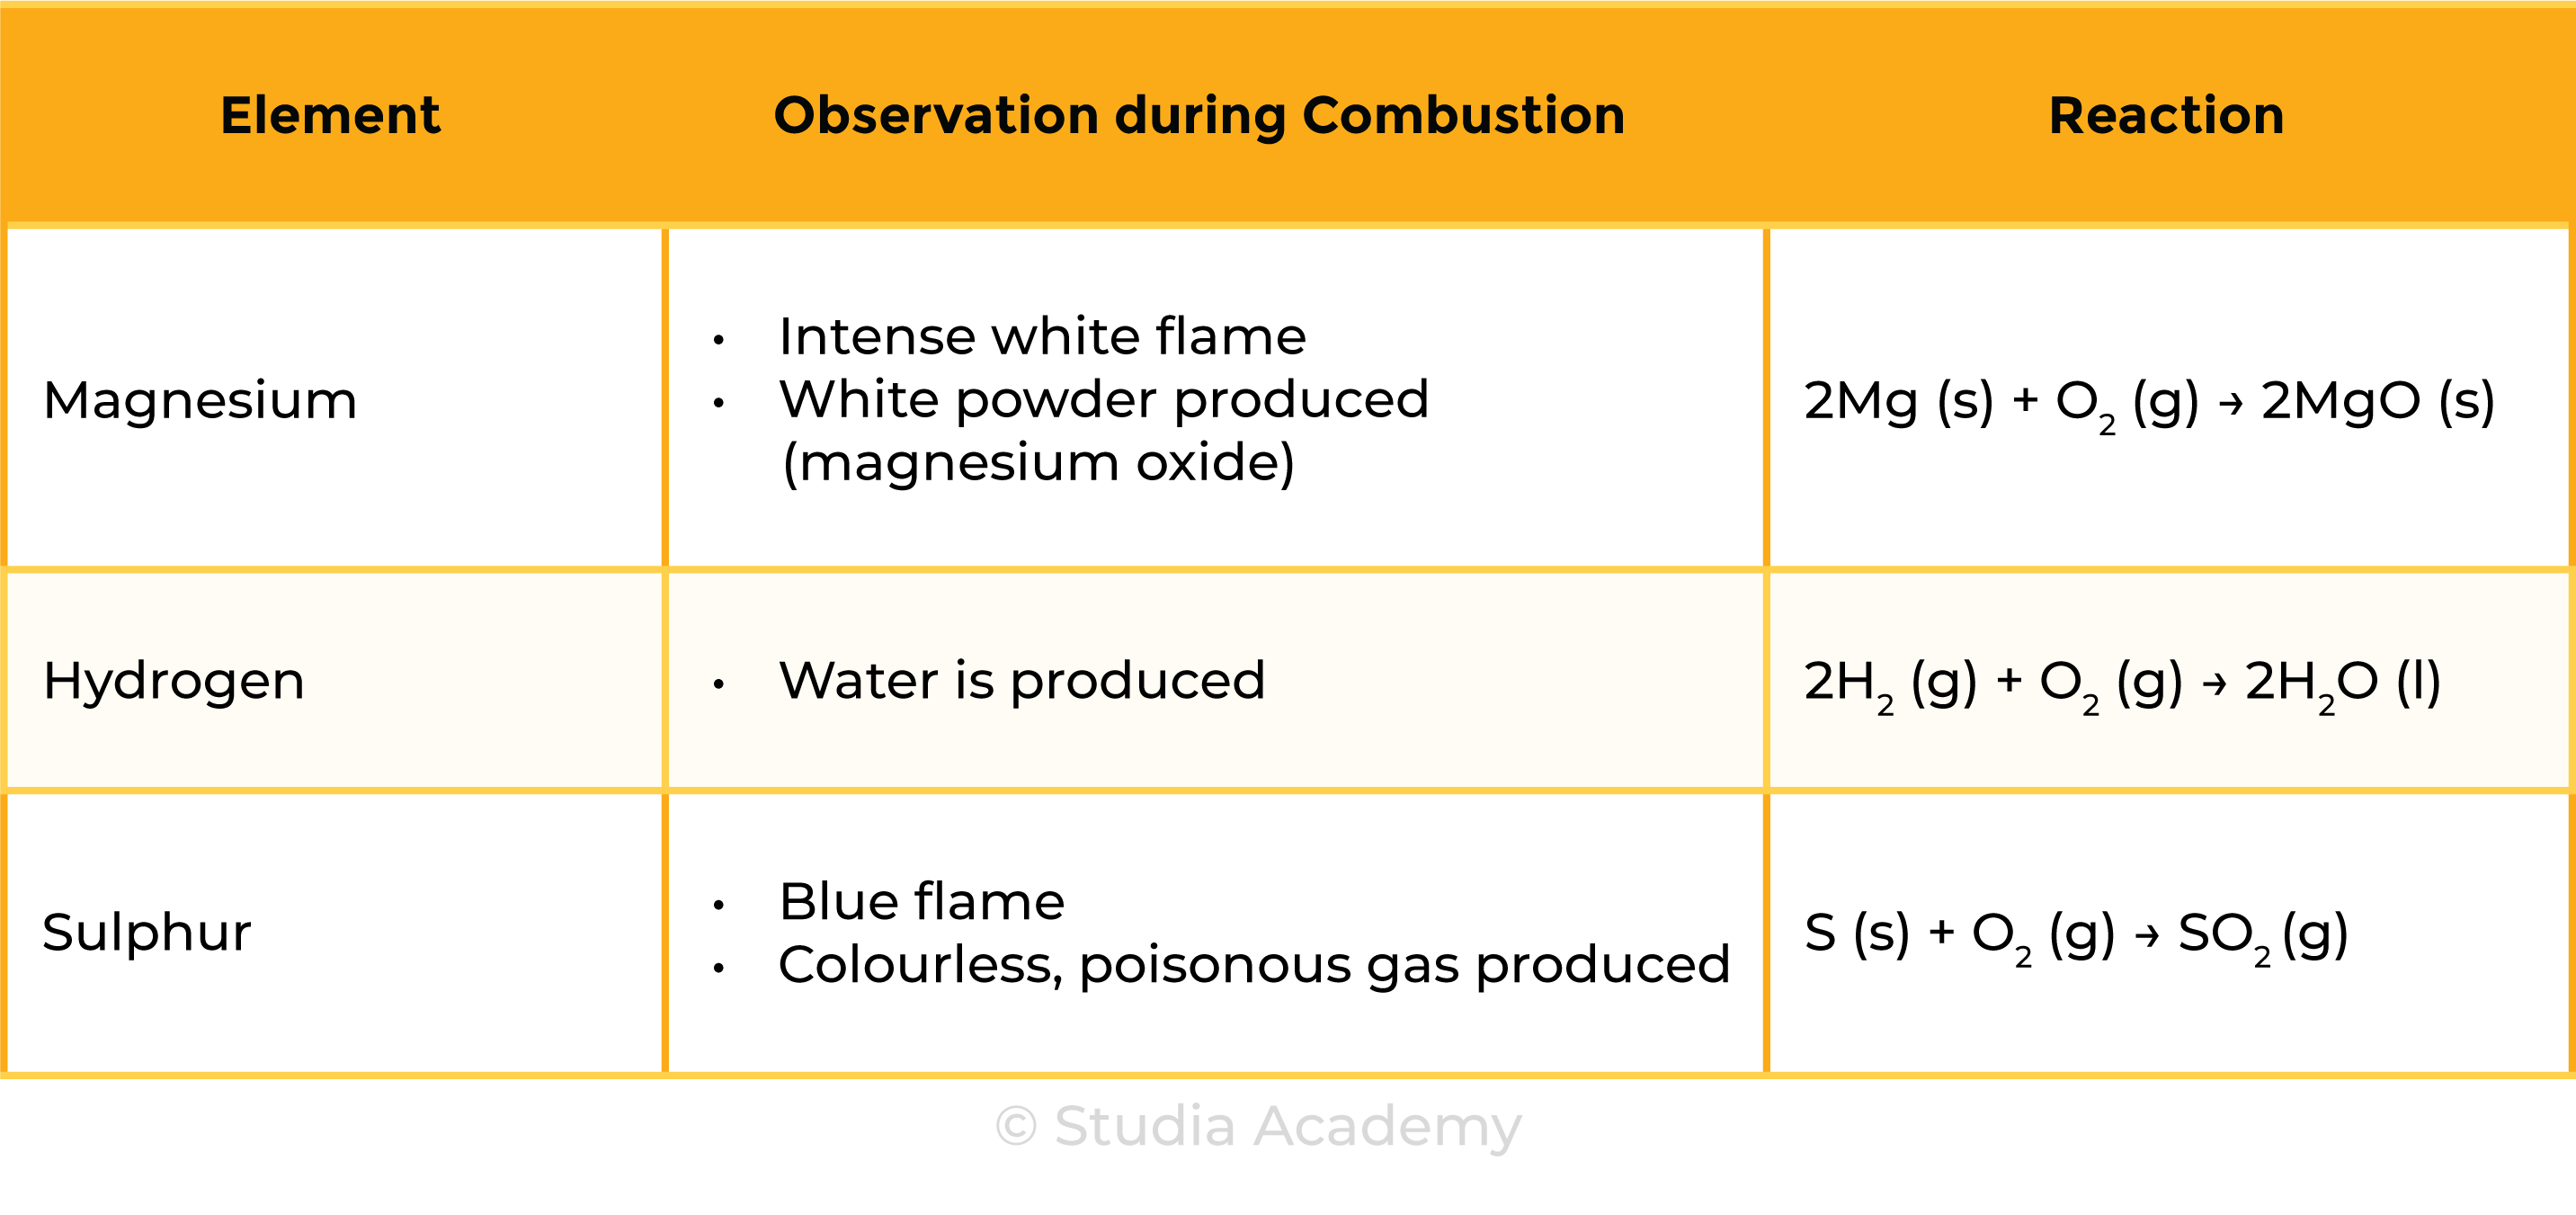 edexcel_igcse_chemistry_topic 12 tables_gases in the atmosphere_001_combustion of magnesium, hydrogen, sulphur